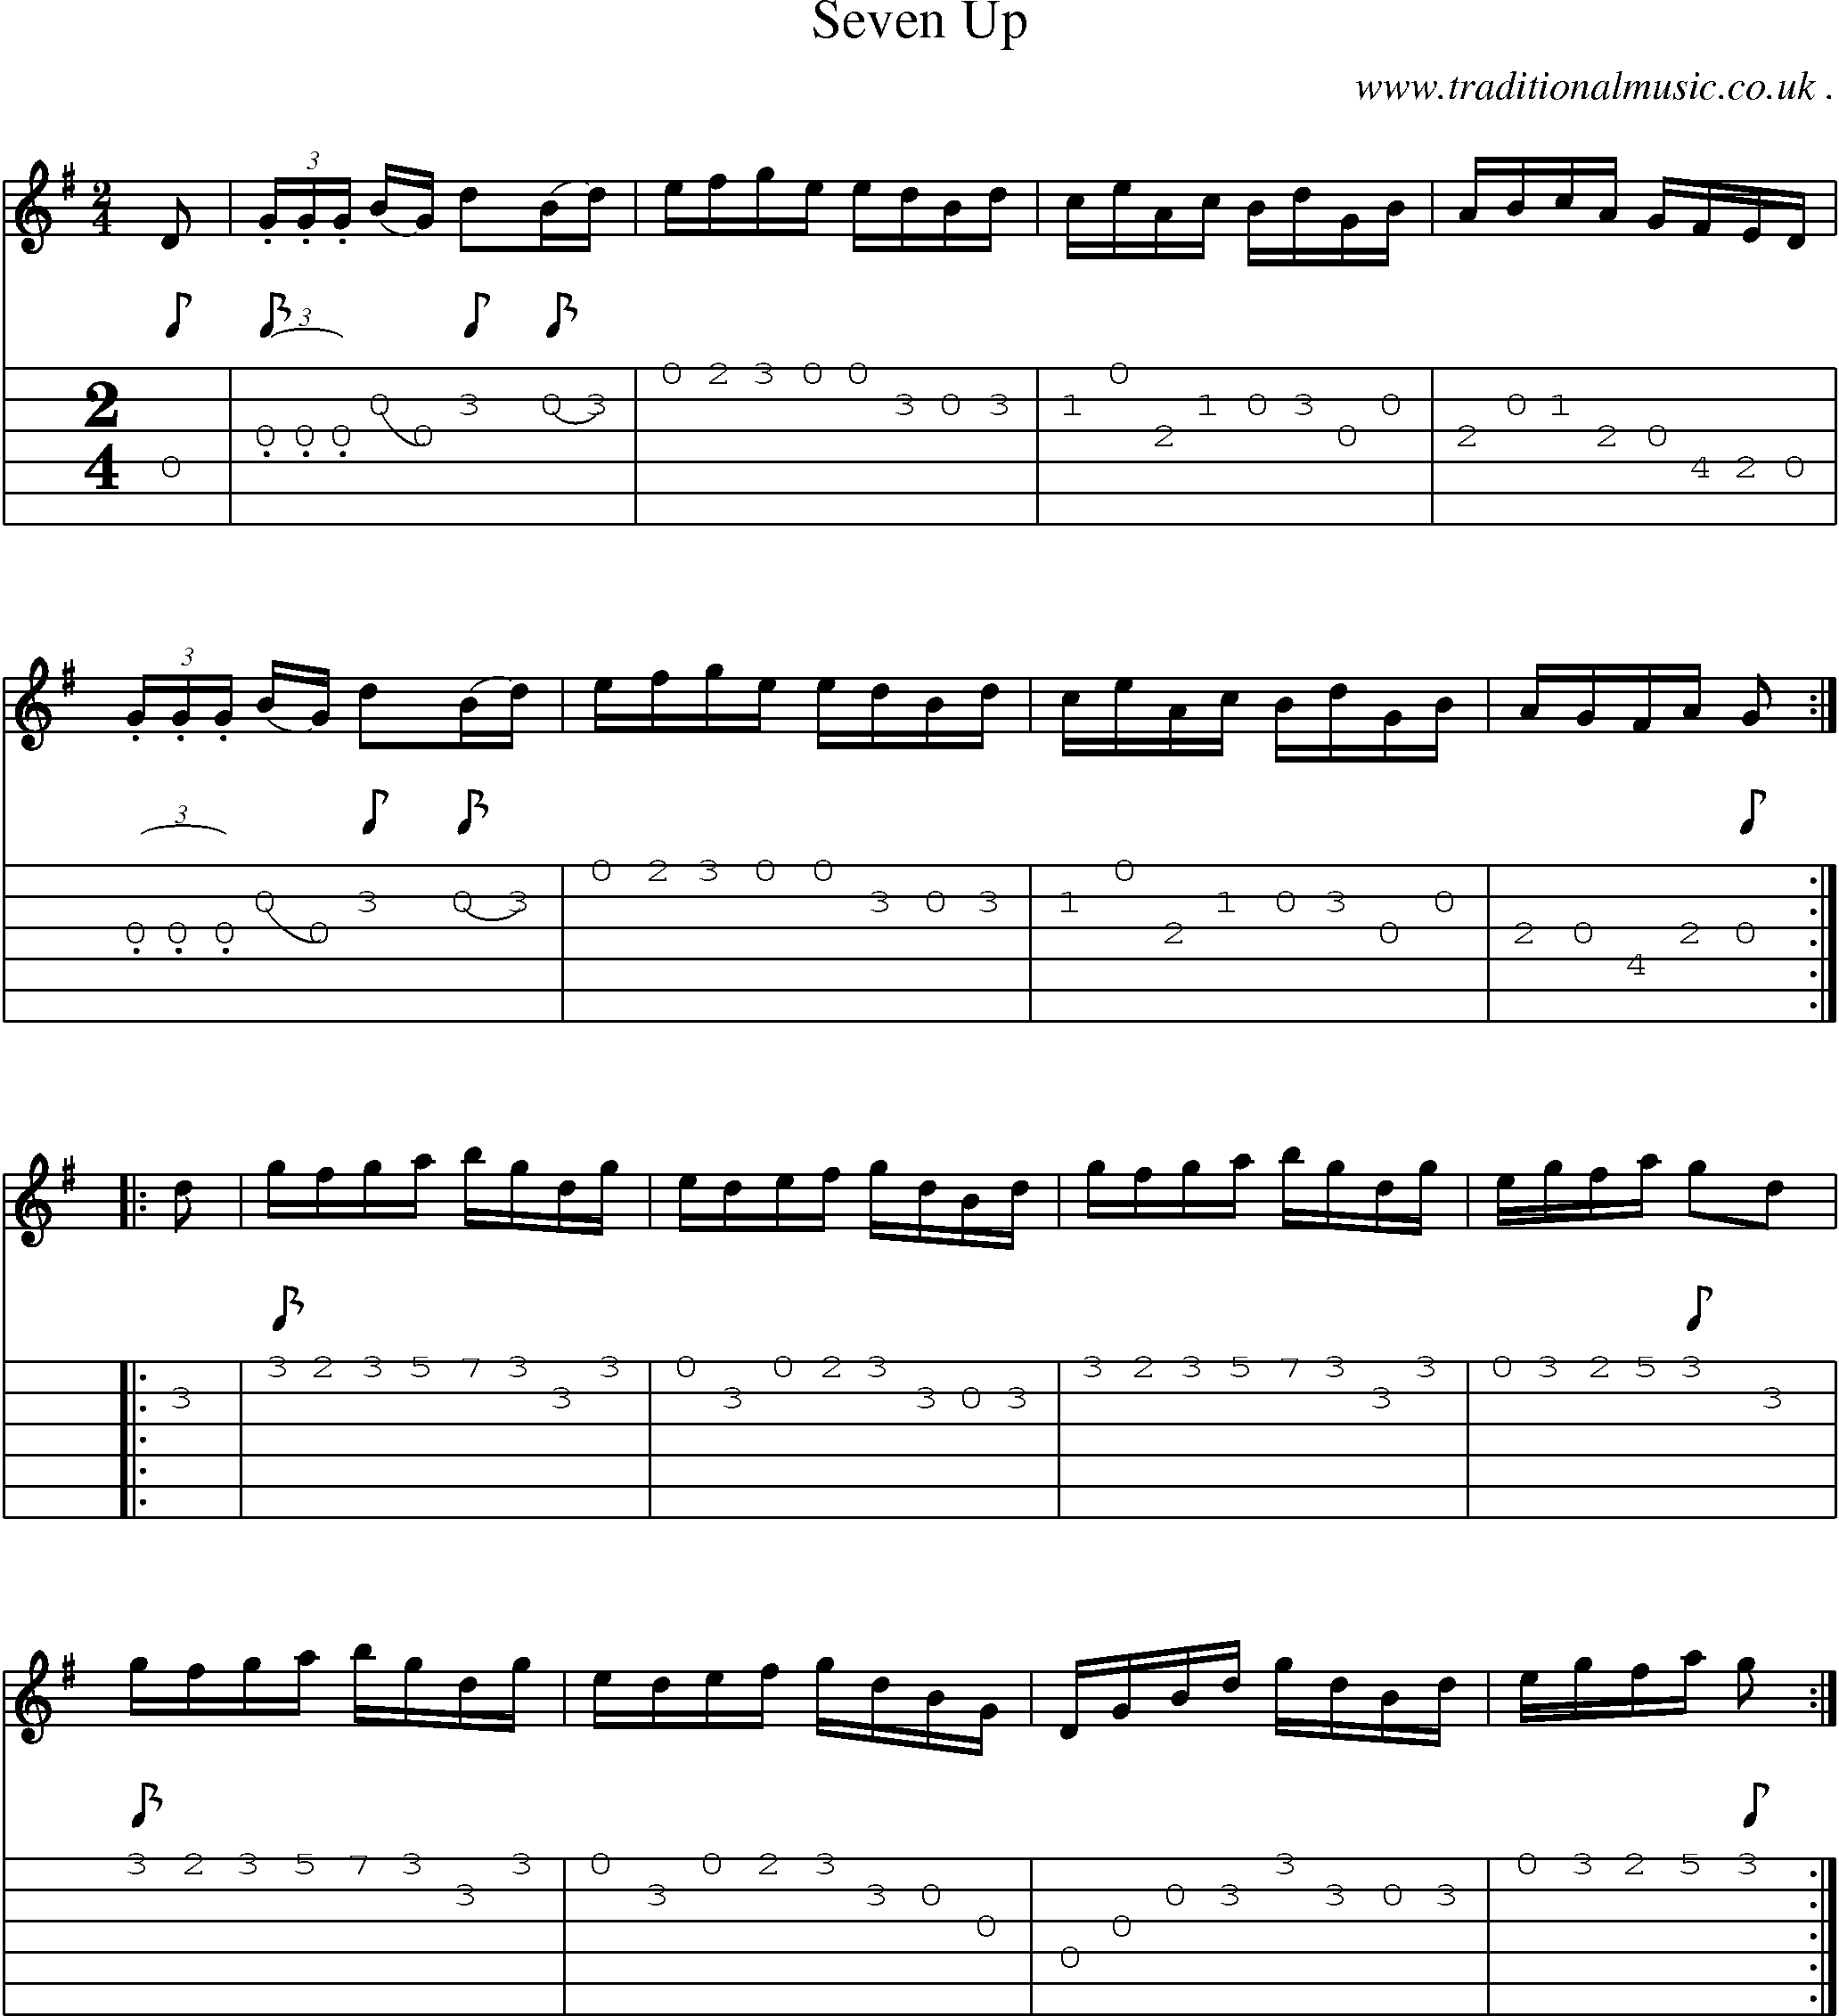 Sheet-Music and Guitar Tabs for Seven Up